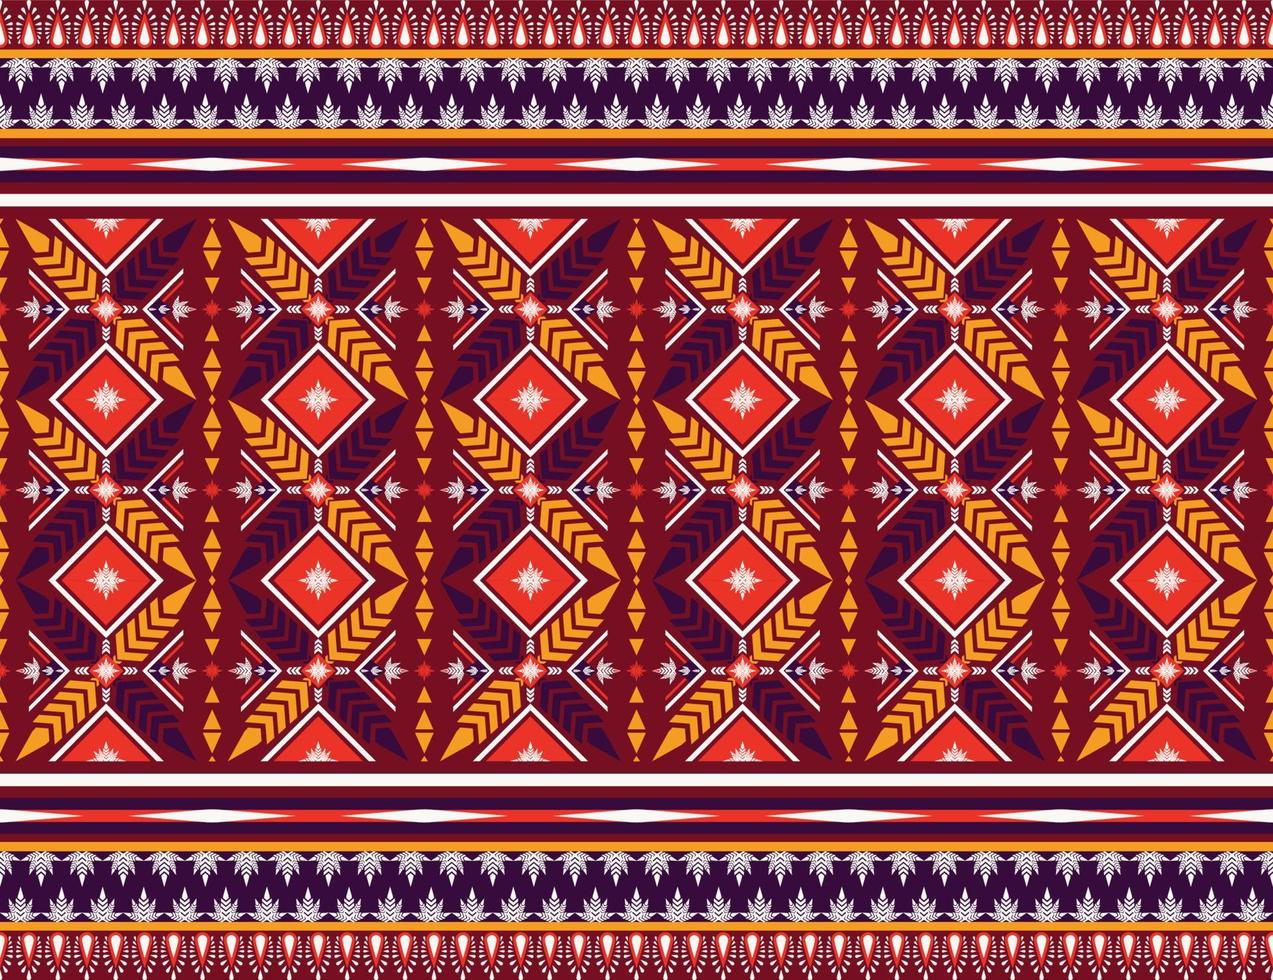 Ethnic fabric texture pattern Abstract Geometric Vector Aztec oriental illustration retro embroidery repeating ceramic tile